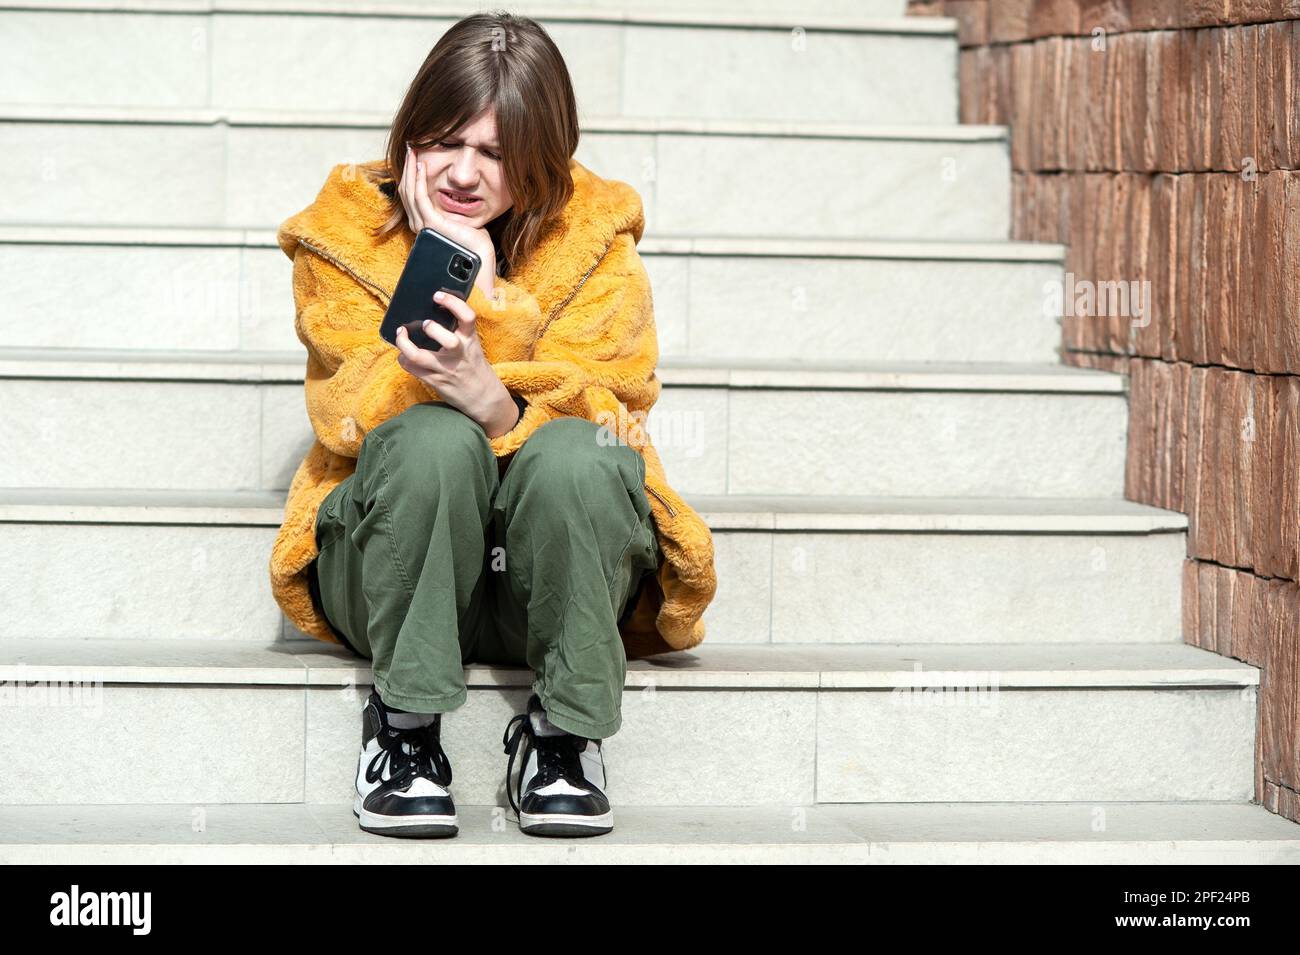 Young pretty woman in a yellow fur coat, social media influencer, sitting on stairs of the building city using smartphone. Stock Photo